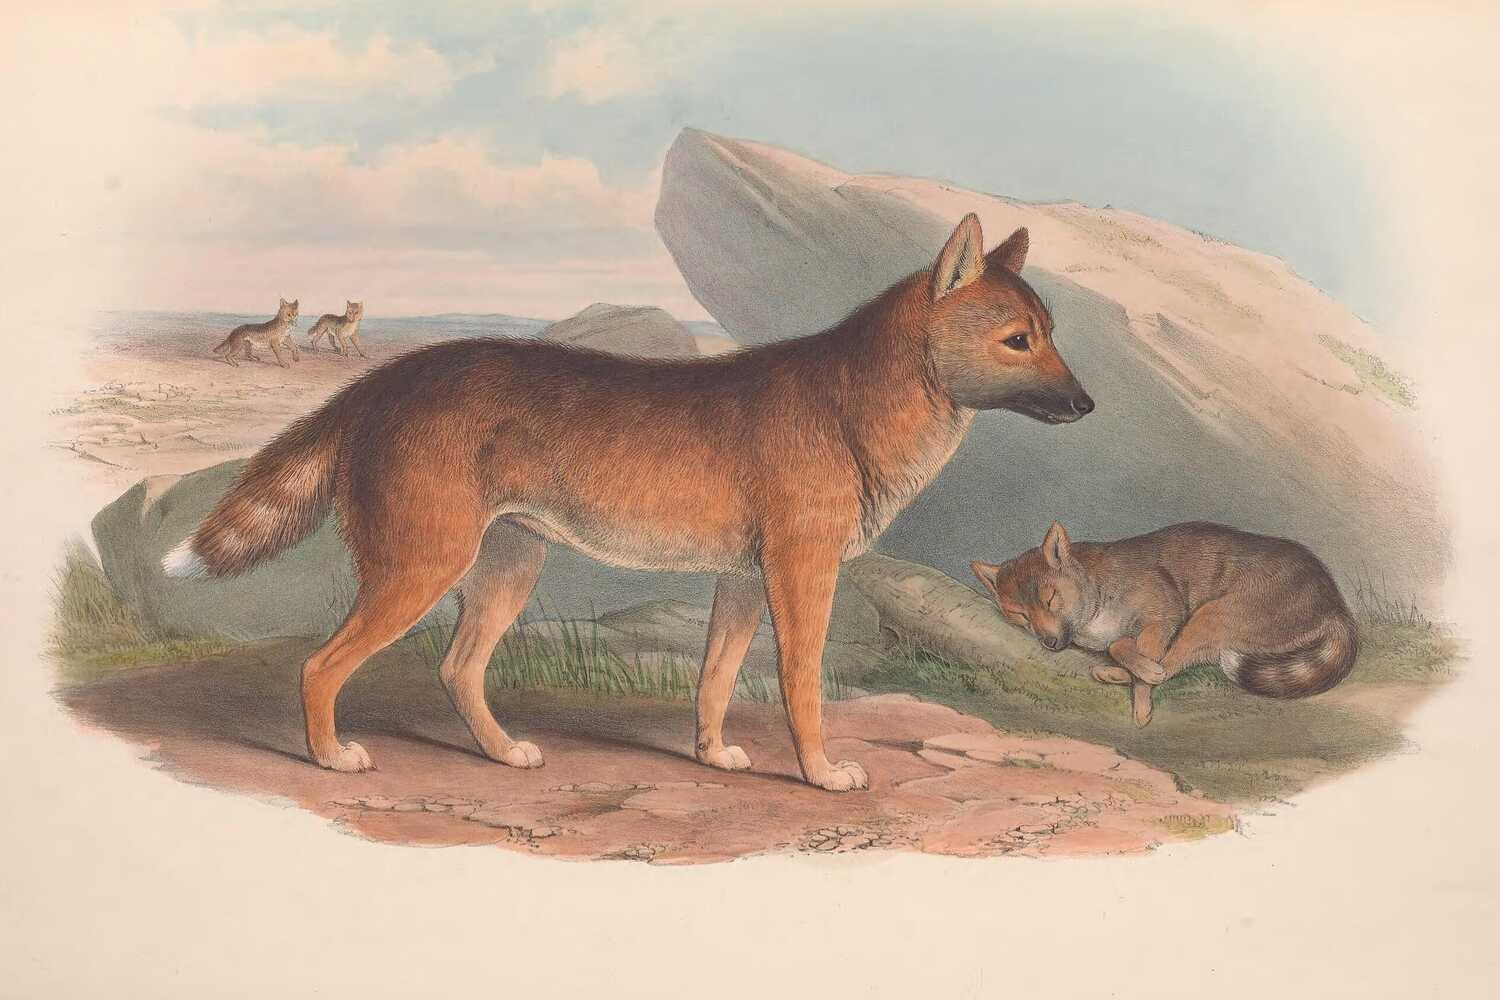 An illustration of several dingoes, from the 1863 book “The Mammals of Australia.” A recent paper suggested that the wild dogs may have been trusted companions of the First Australians.